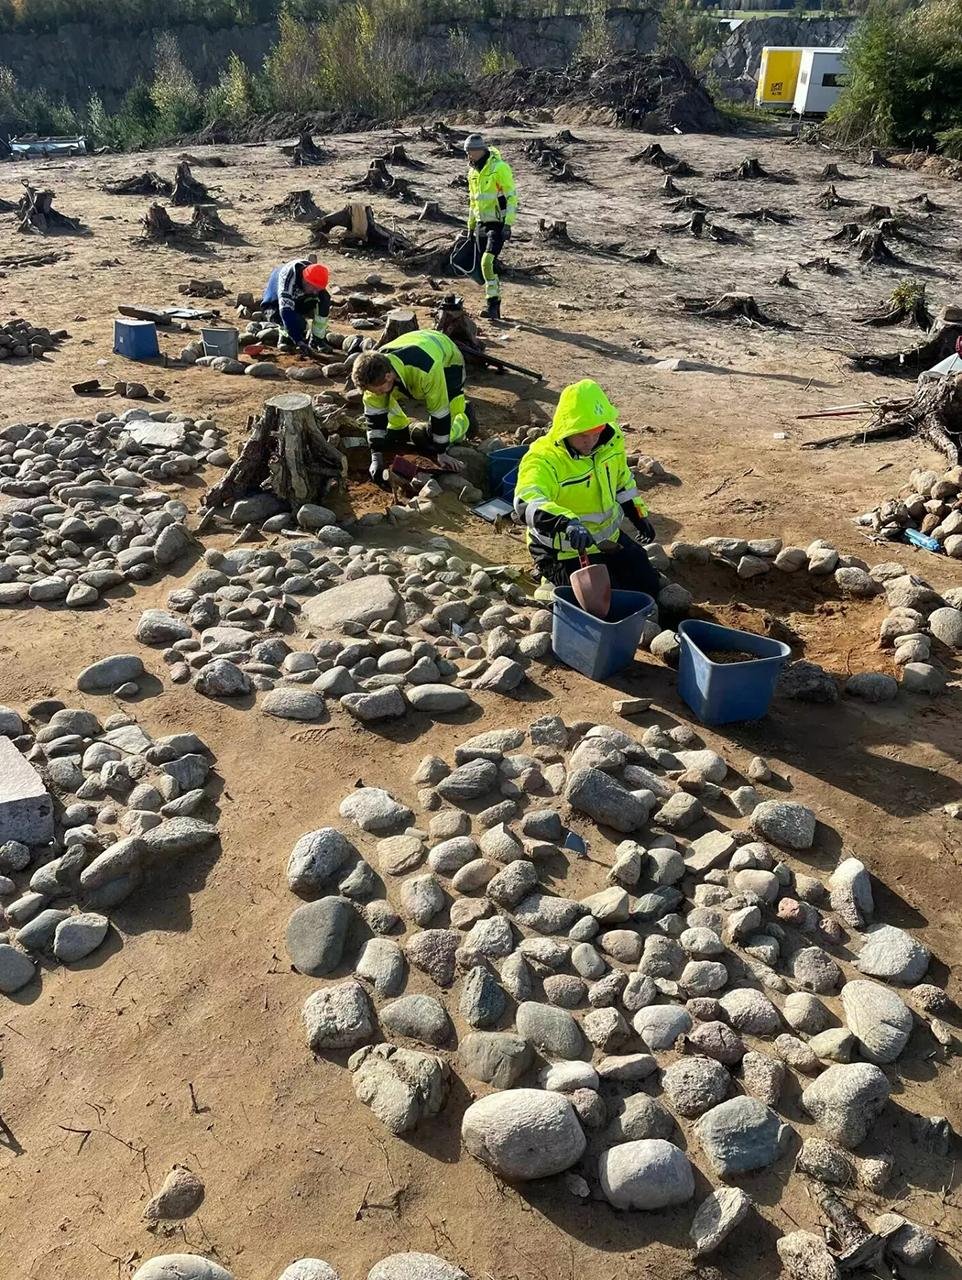 Over 30 circular stone formations with children’s cremated remains uncovered in Norway